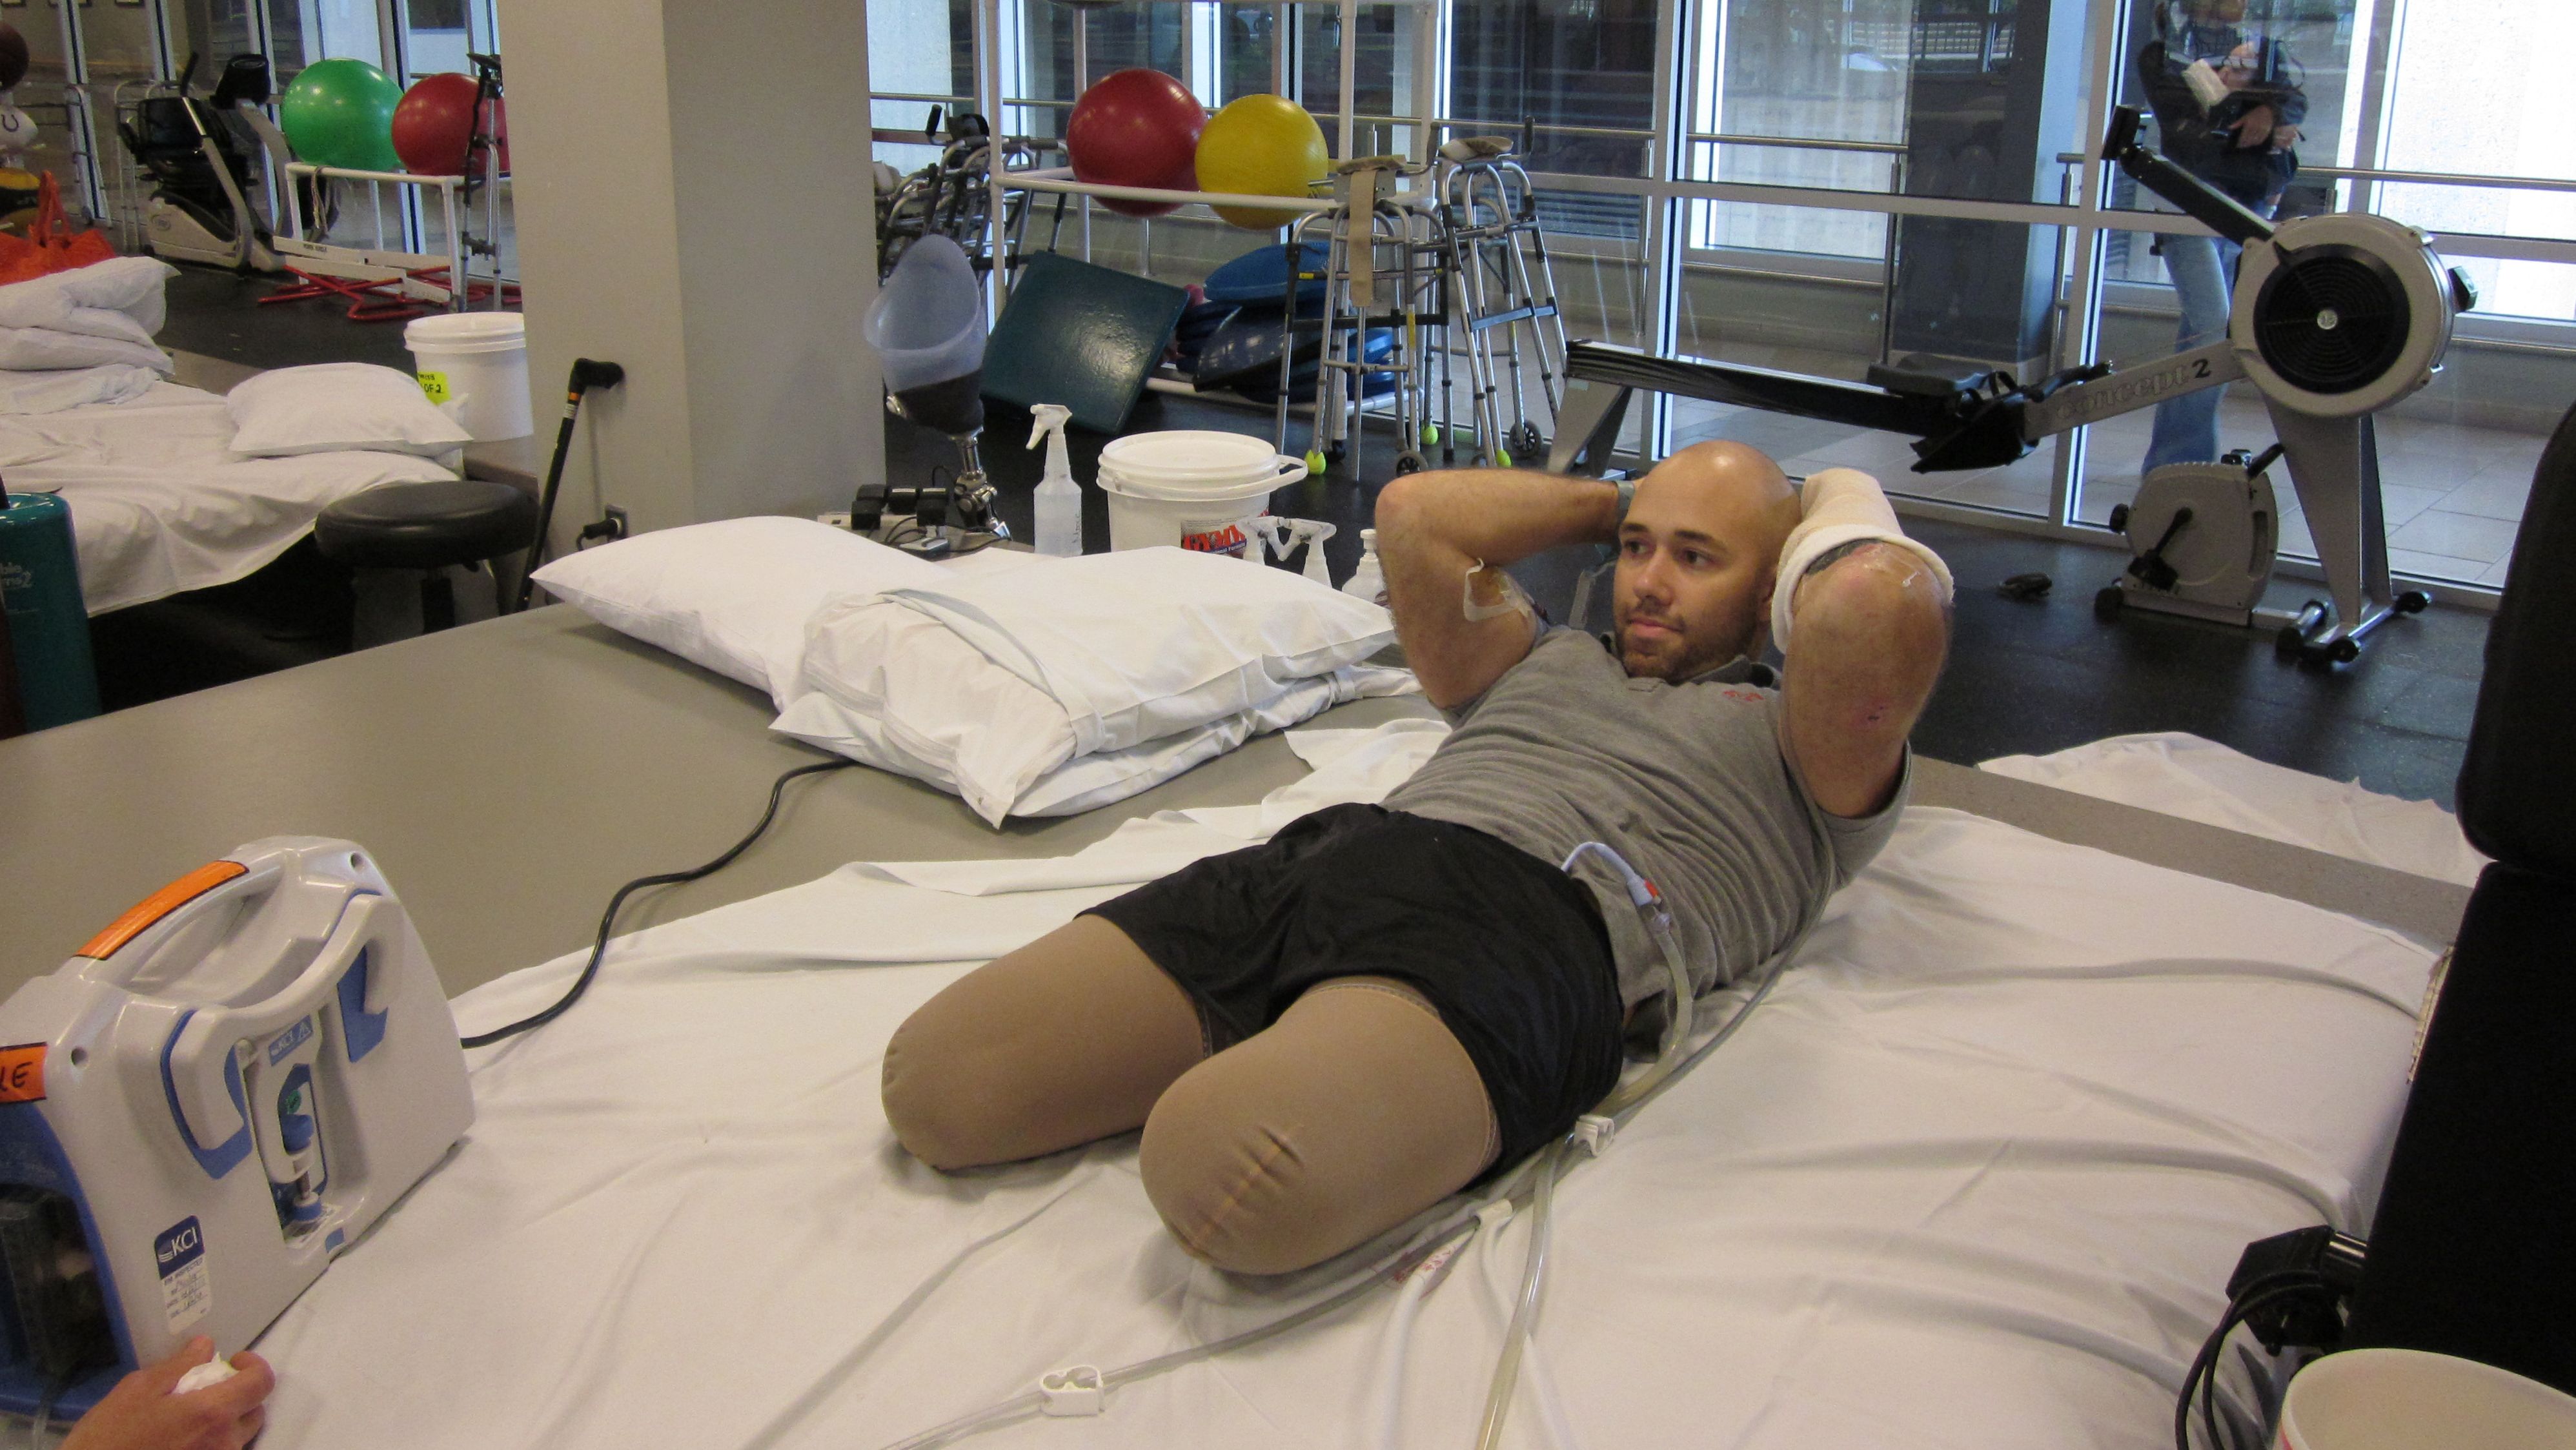 Brian Mast undergoing therapy.